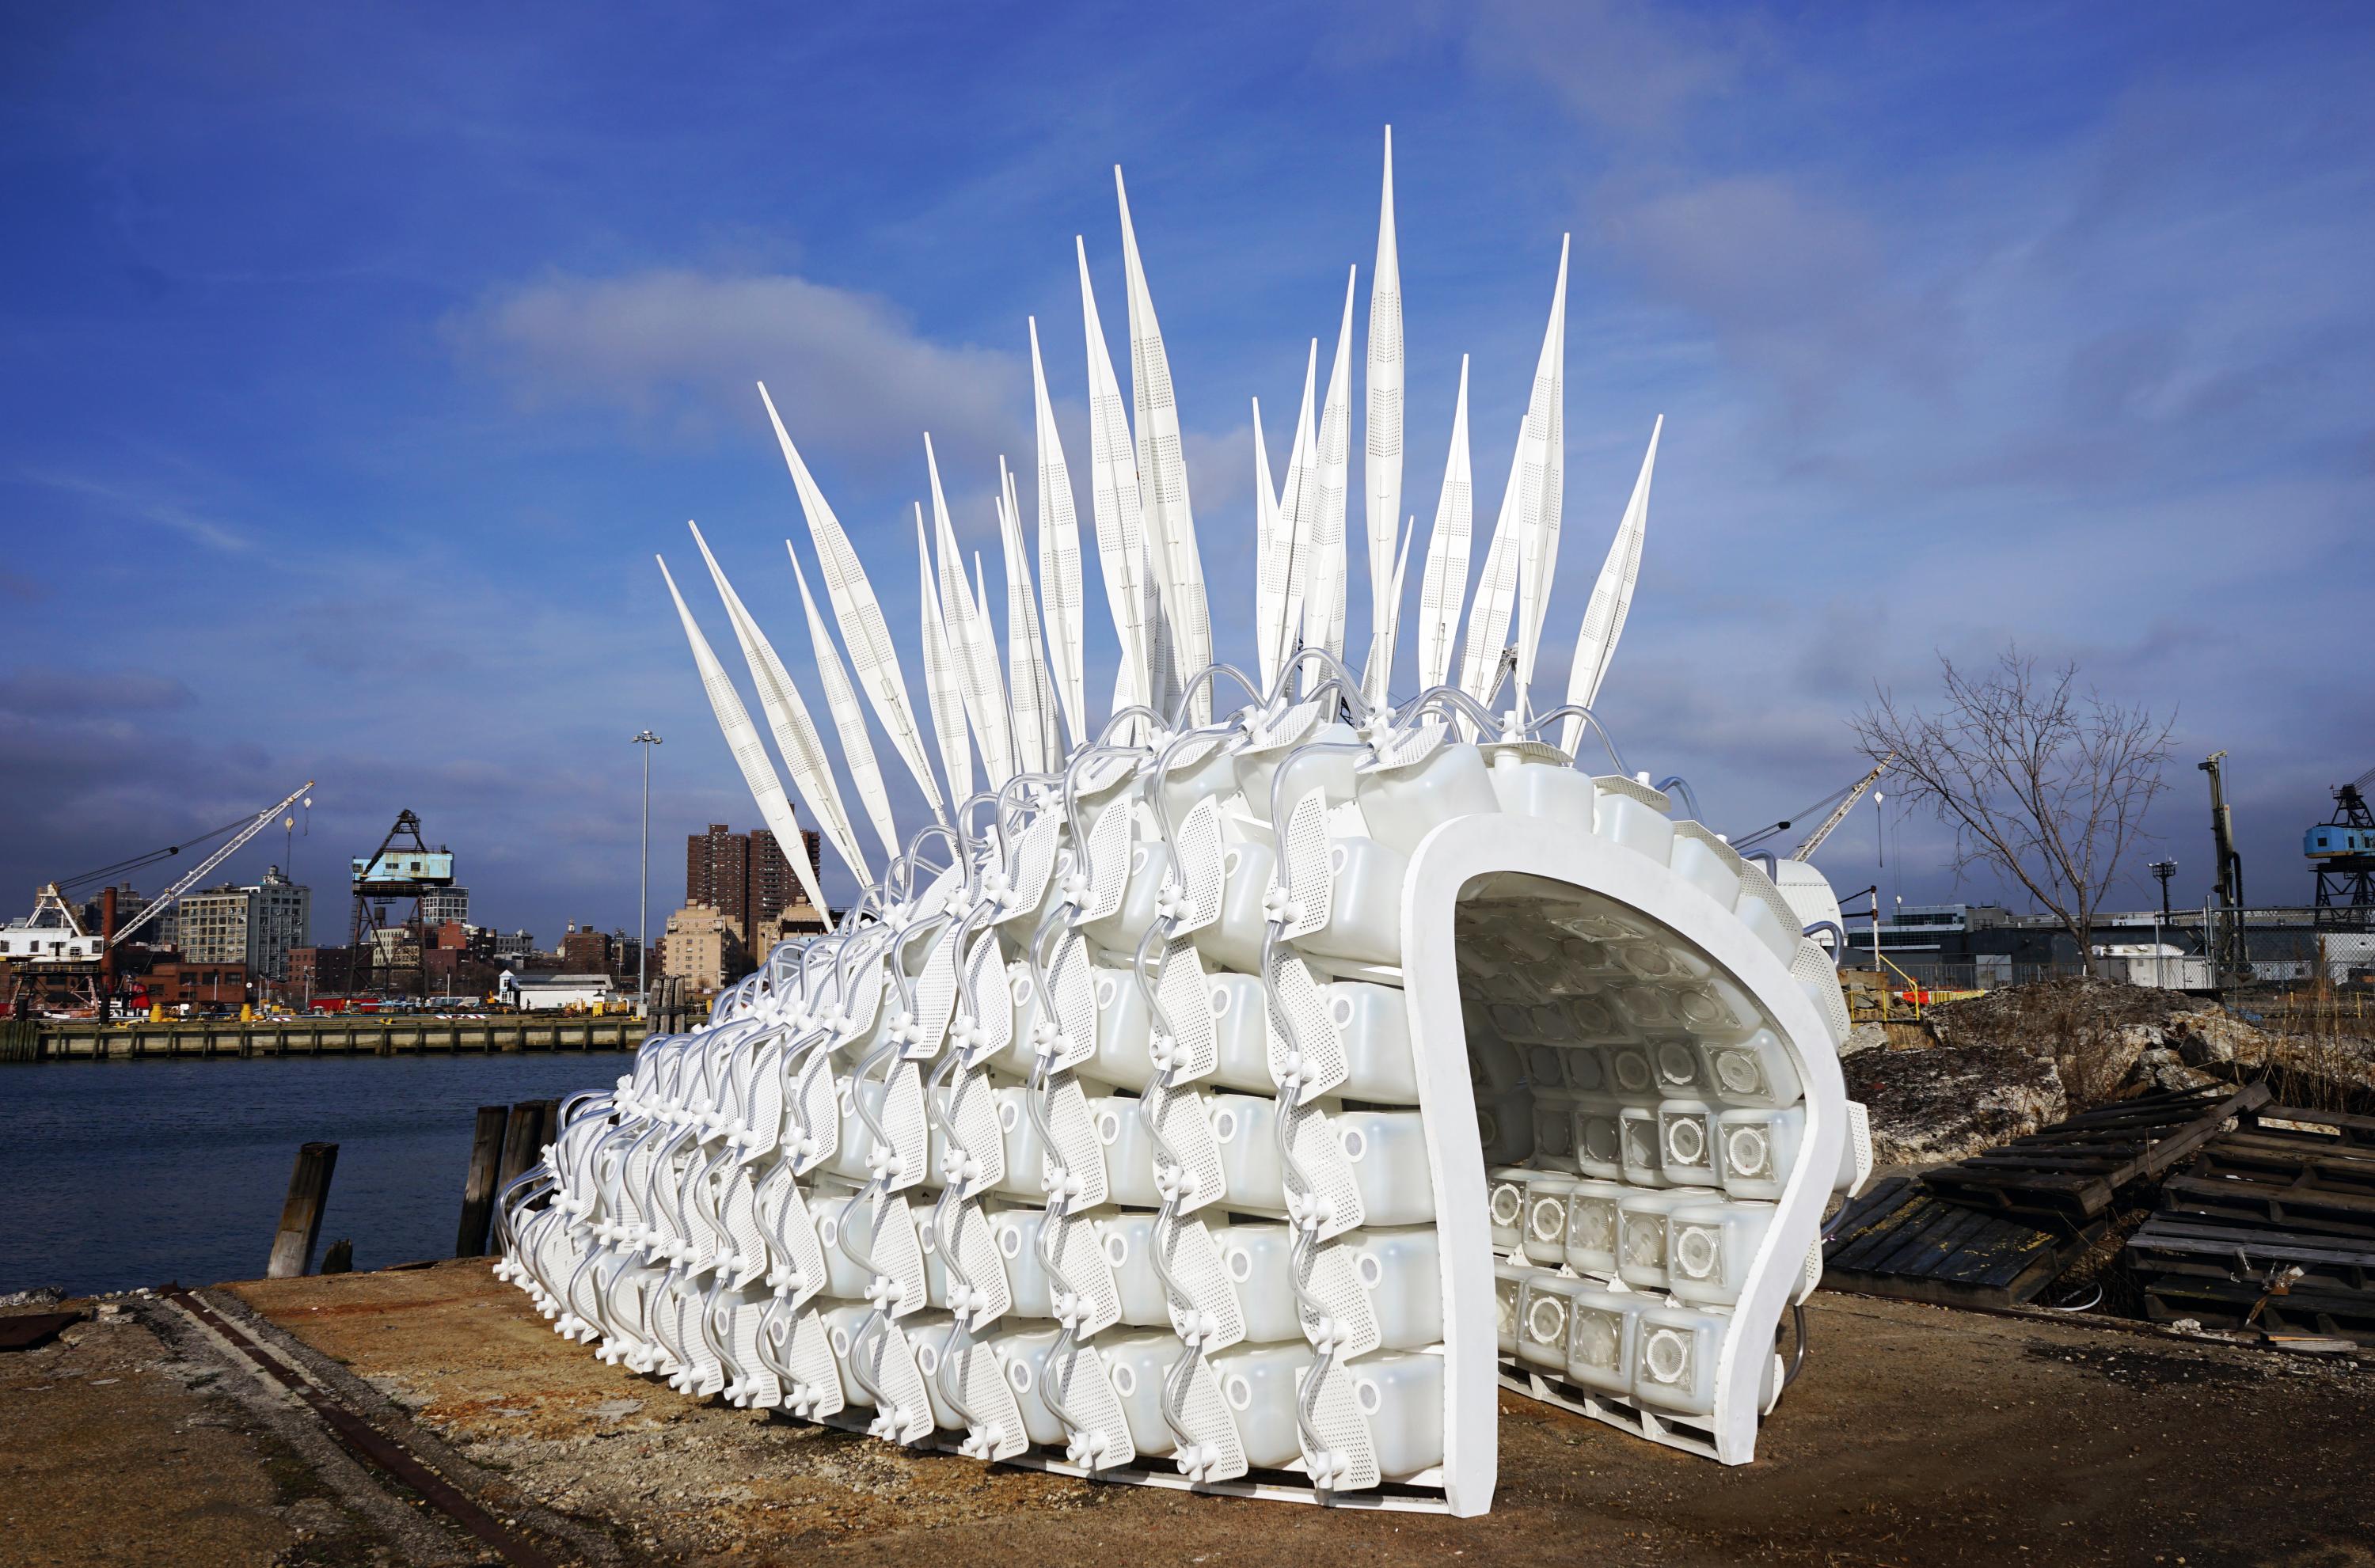 A white modular structure made of insect incubators, photographed outdoors in front of blue sky. 